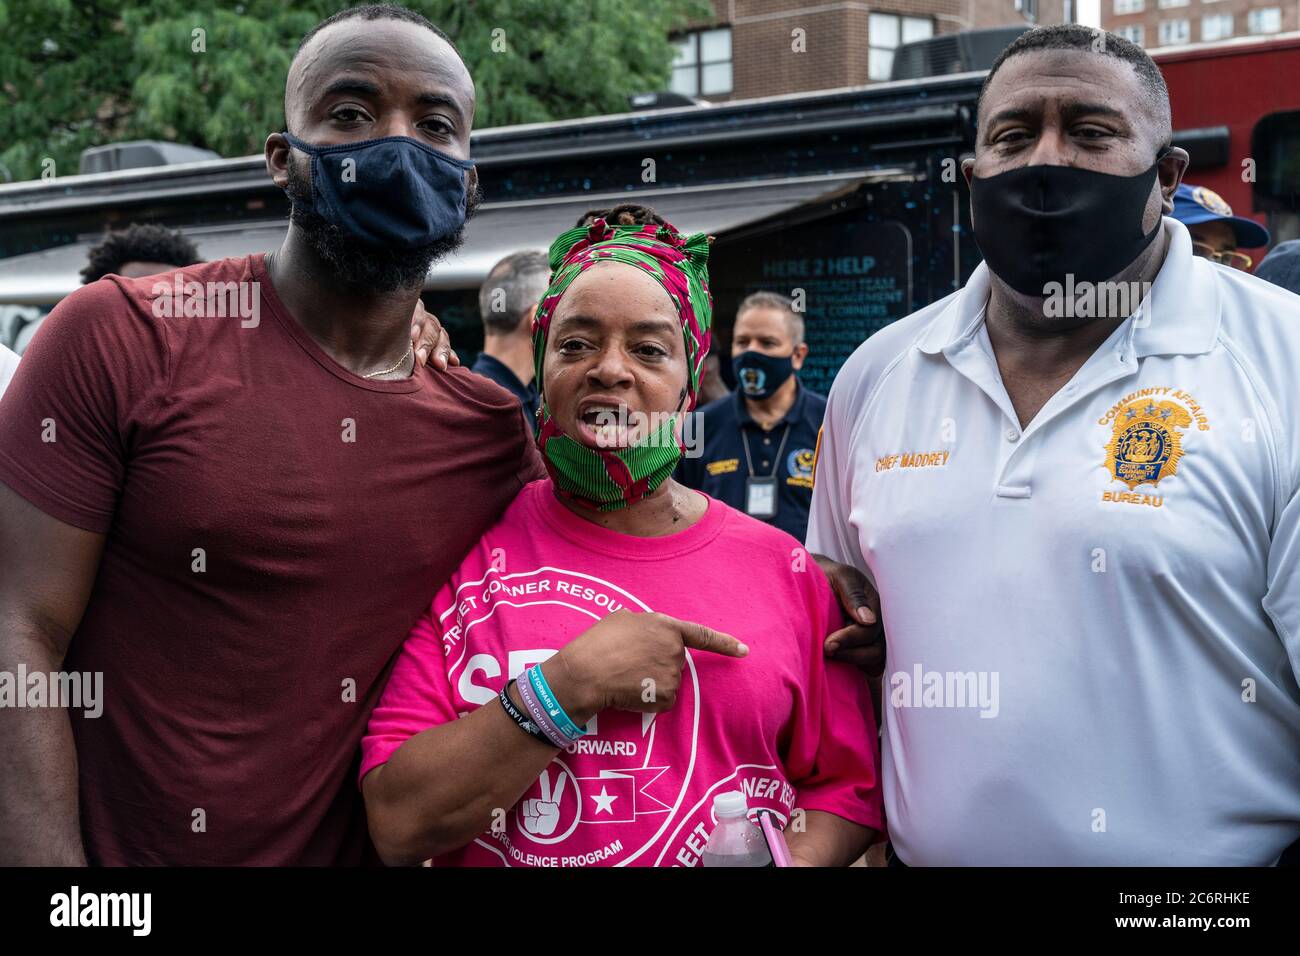 New York, NY - July 11, 2020: Author Antonio Hairston, activist Iesha Sekou, NYPD Chief Jeffrey Maddrey attend Occupy the Corner rally in East Harlem in response on gun violence Stock Photo